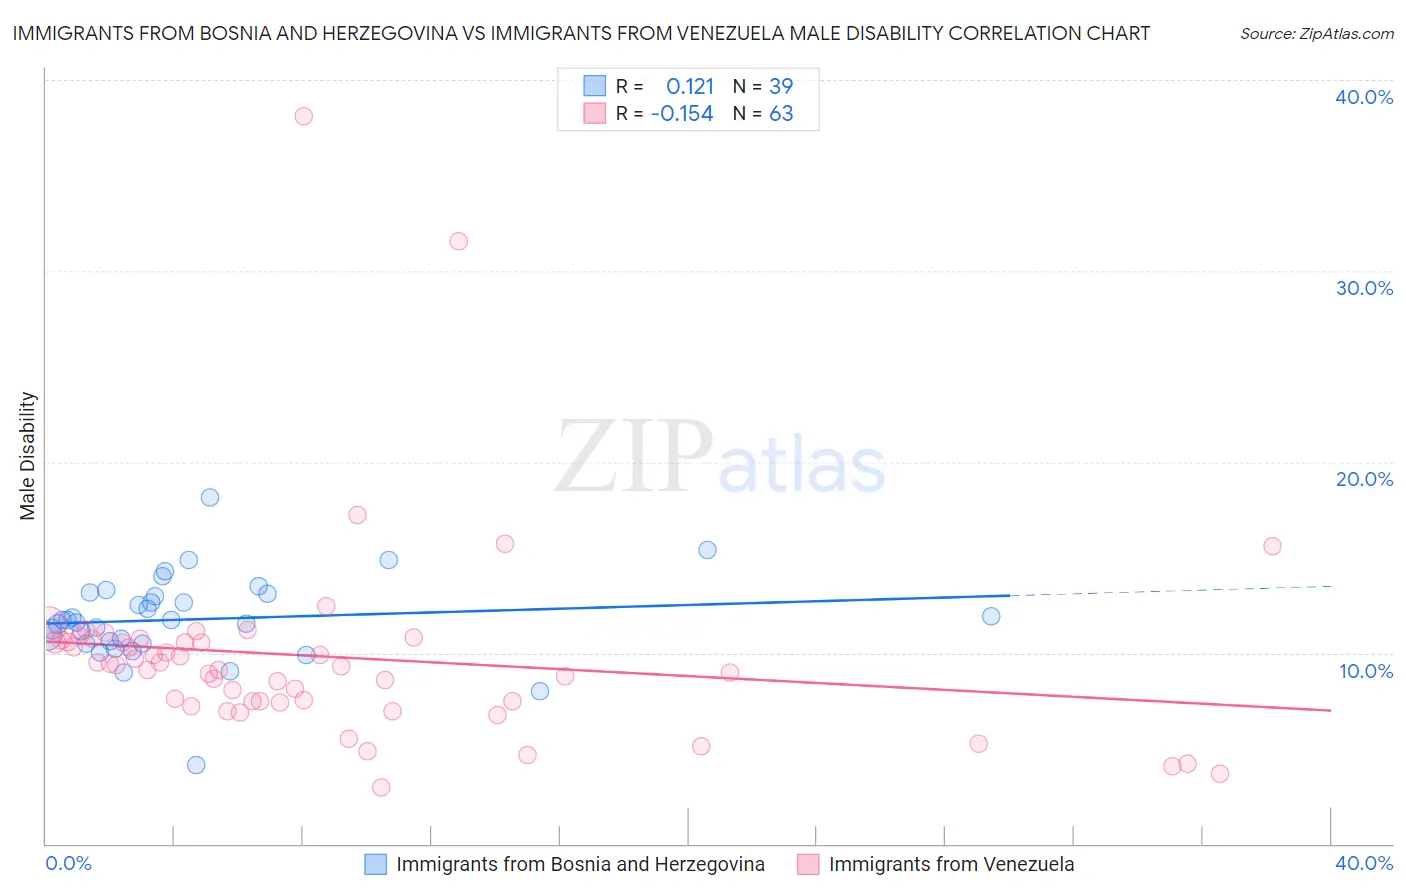 Immigrants from Bosnia and Herzegovina vs Immigrants from Venezuela Male Disability